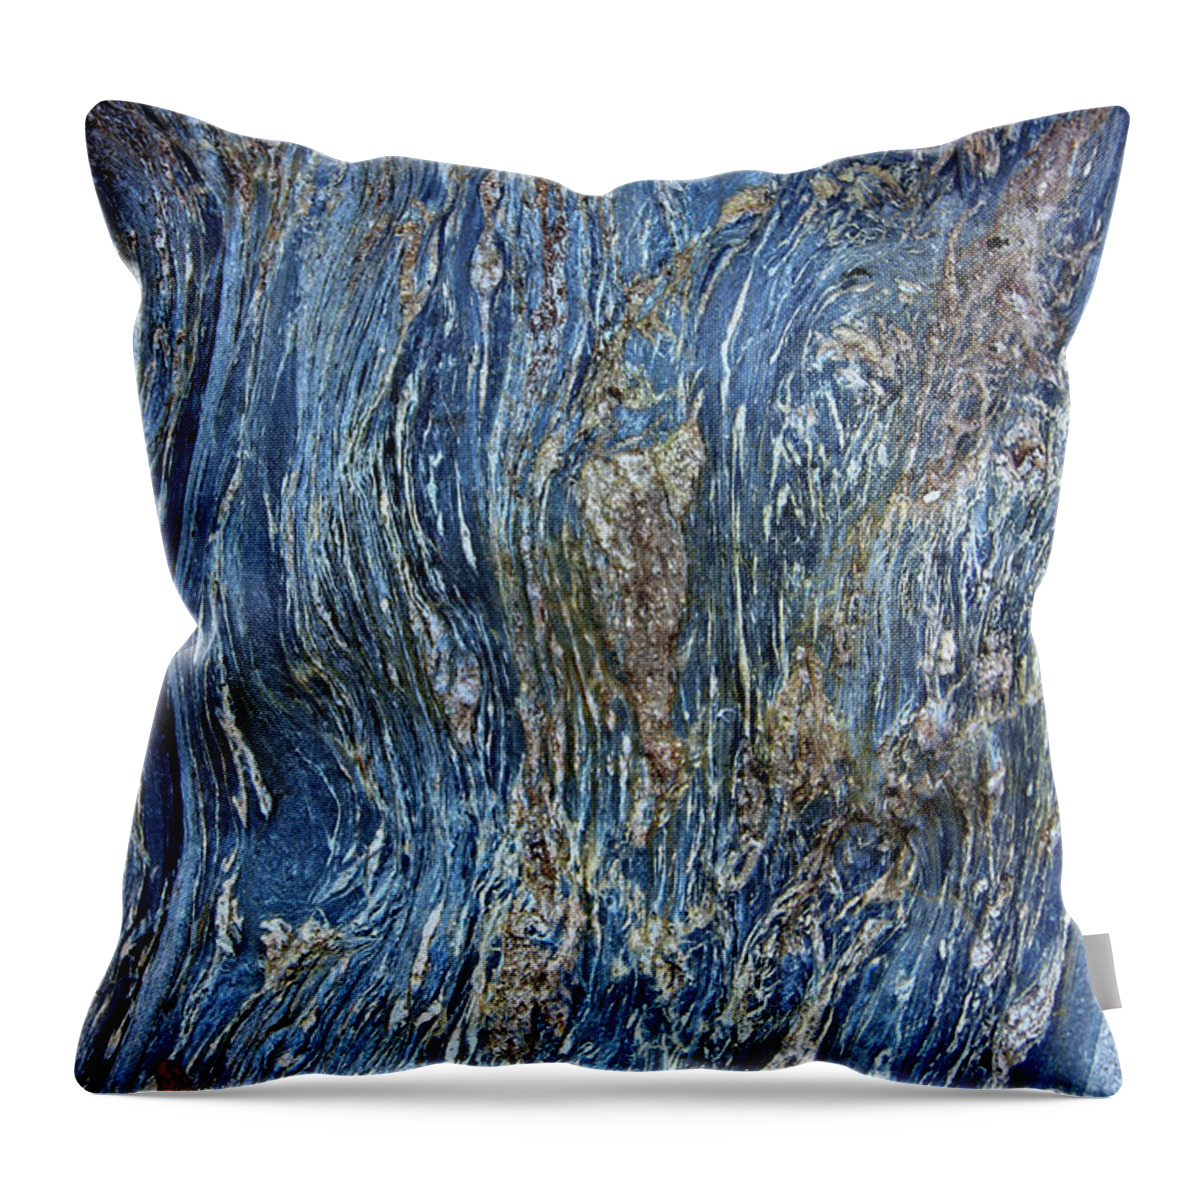 Wood Grain On Rock Throw Pillow featuring the photograph Wood Grain on Rock #1 by Doolittle Photography and Art